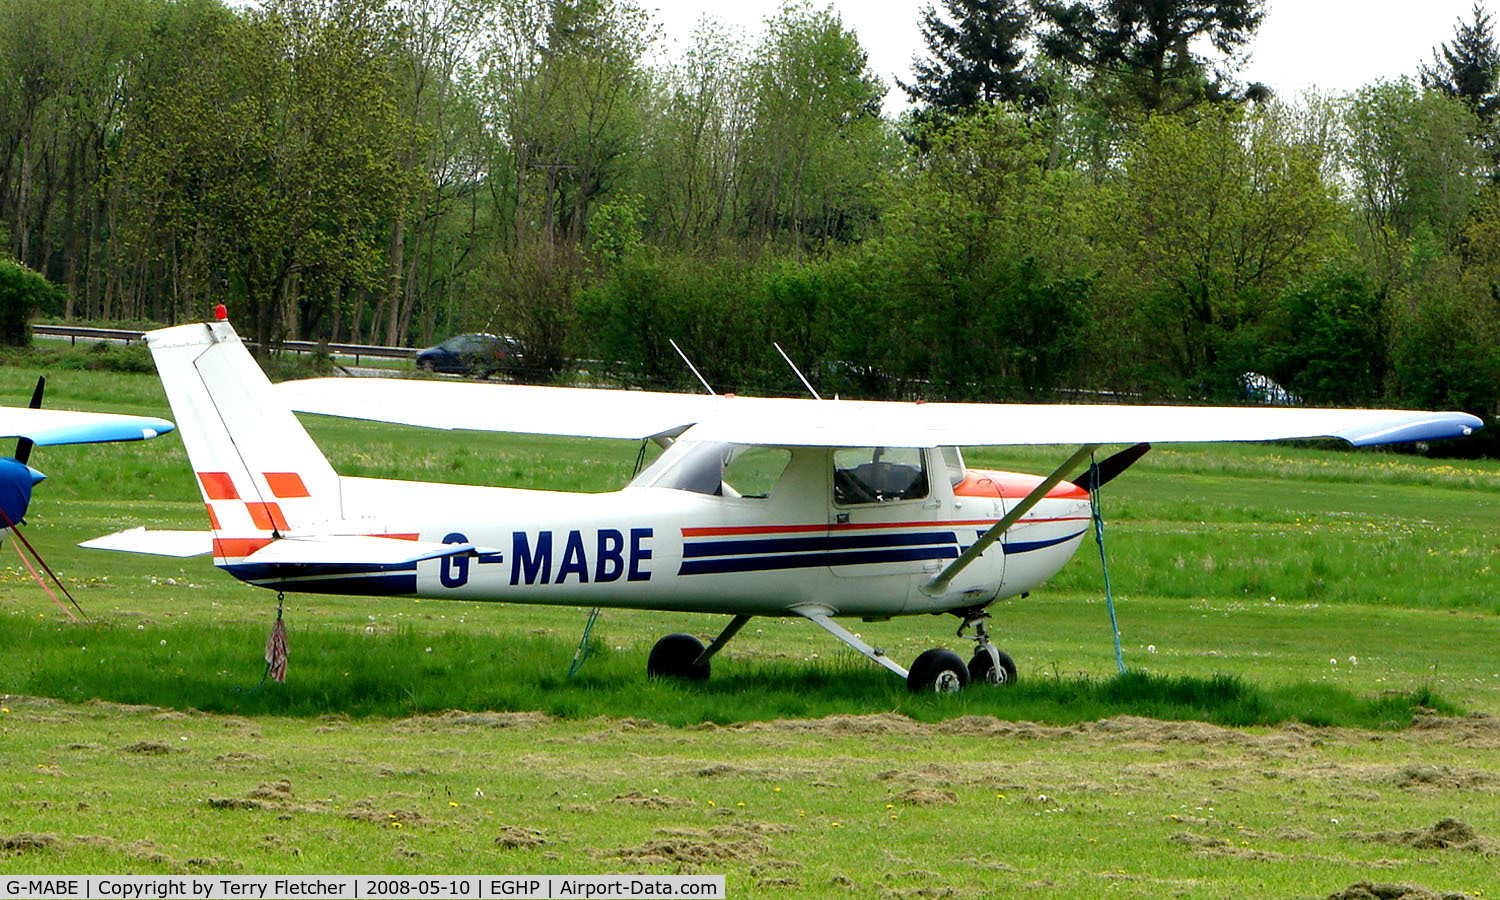 G-MABE, 1974 Reims F150L C/N 1119, A very pleasant general Aviation day at Popham in rural UK